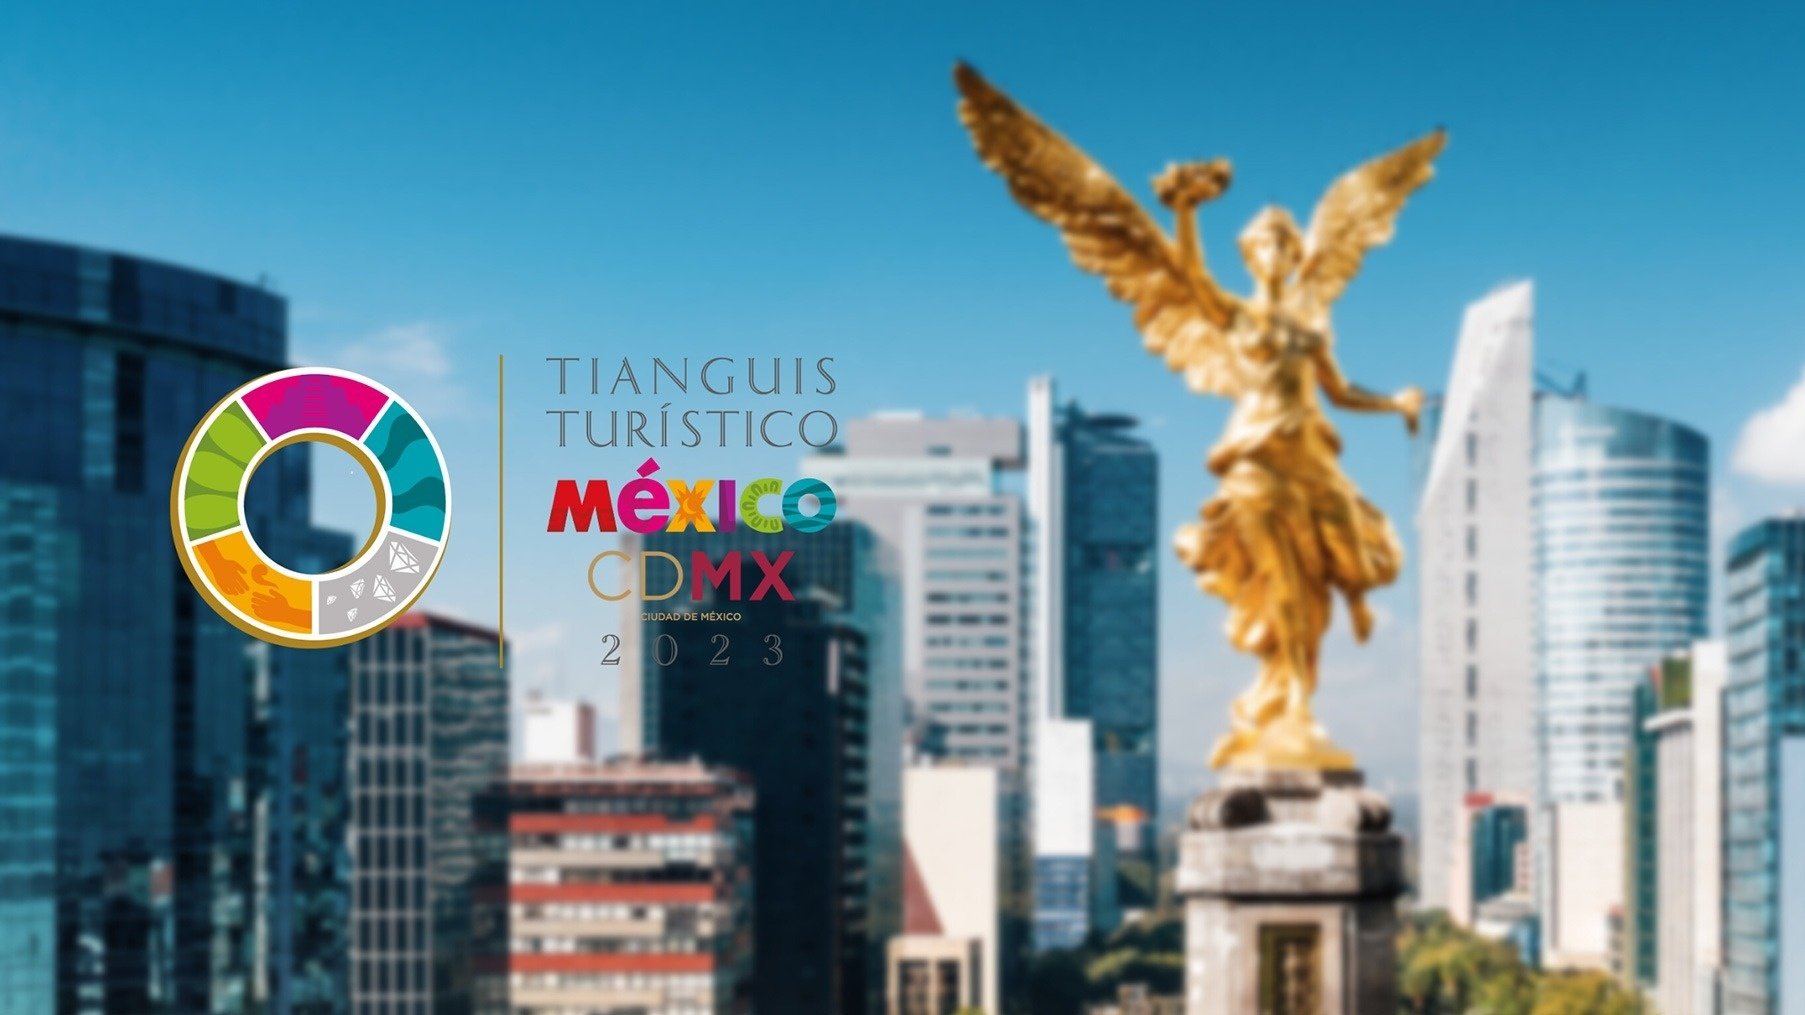 Paraty Tech will complete its presence at the Tianguis Turístico with a party for hoteliers